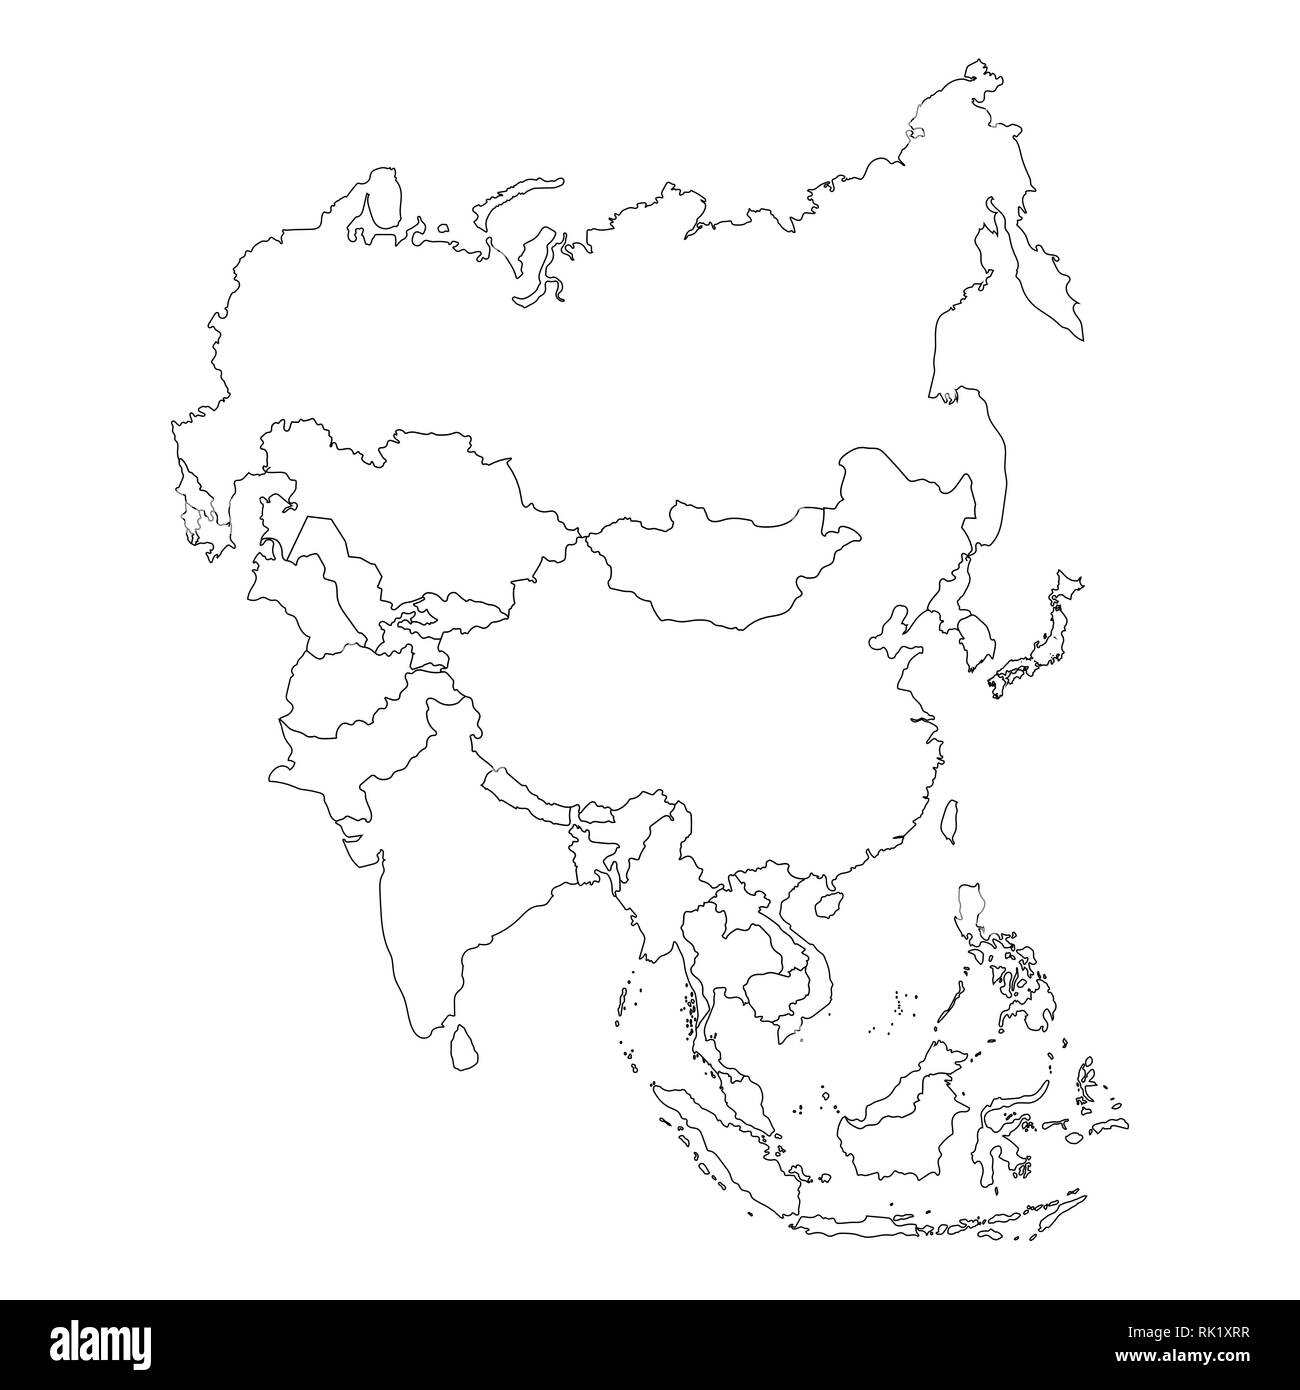 Vector illustration Asia outline map isolated on white background. Asian continent icon Stock Vector